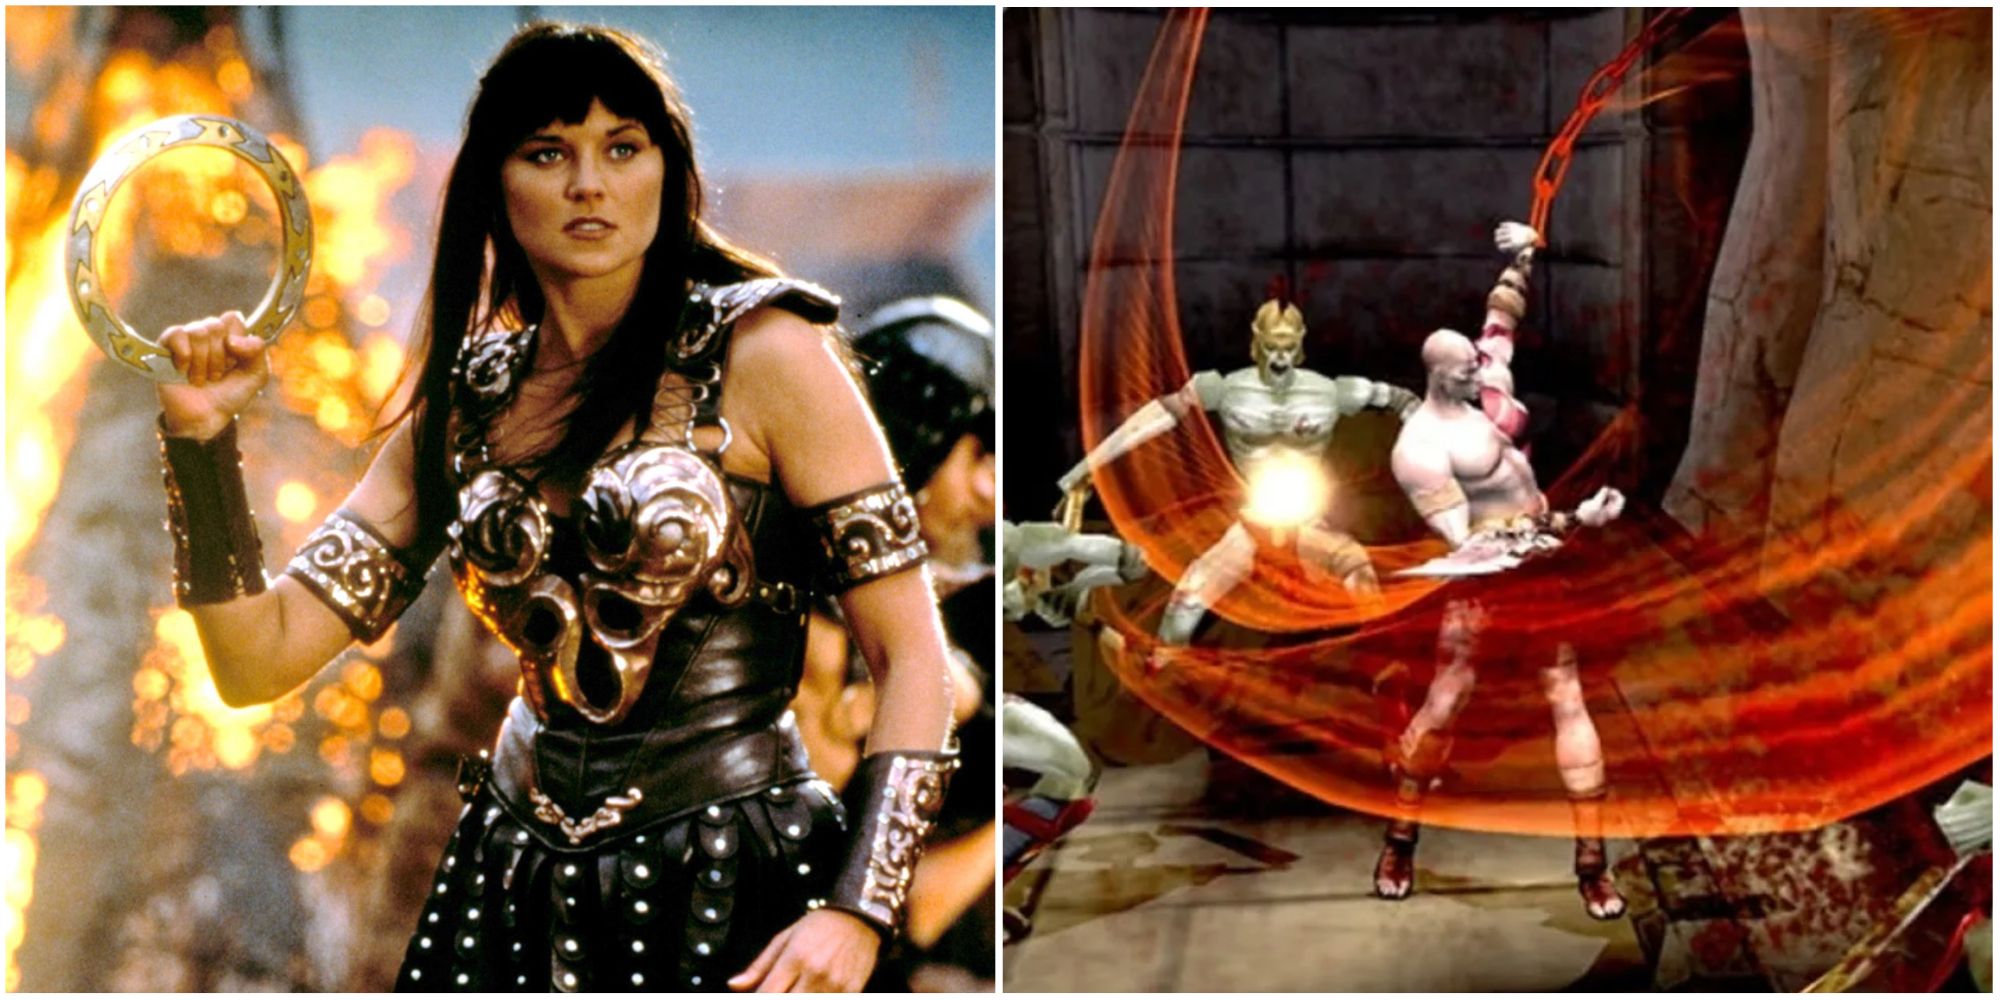 Xena in Xena: Warrior Princess and Kratos in God of War